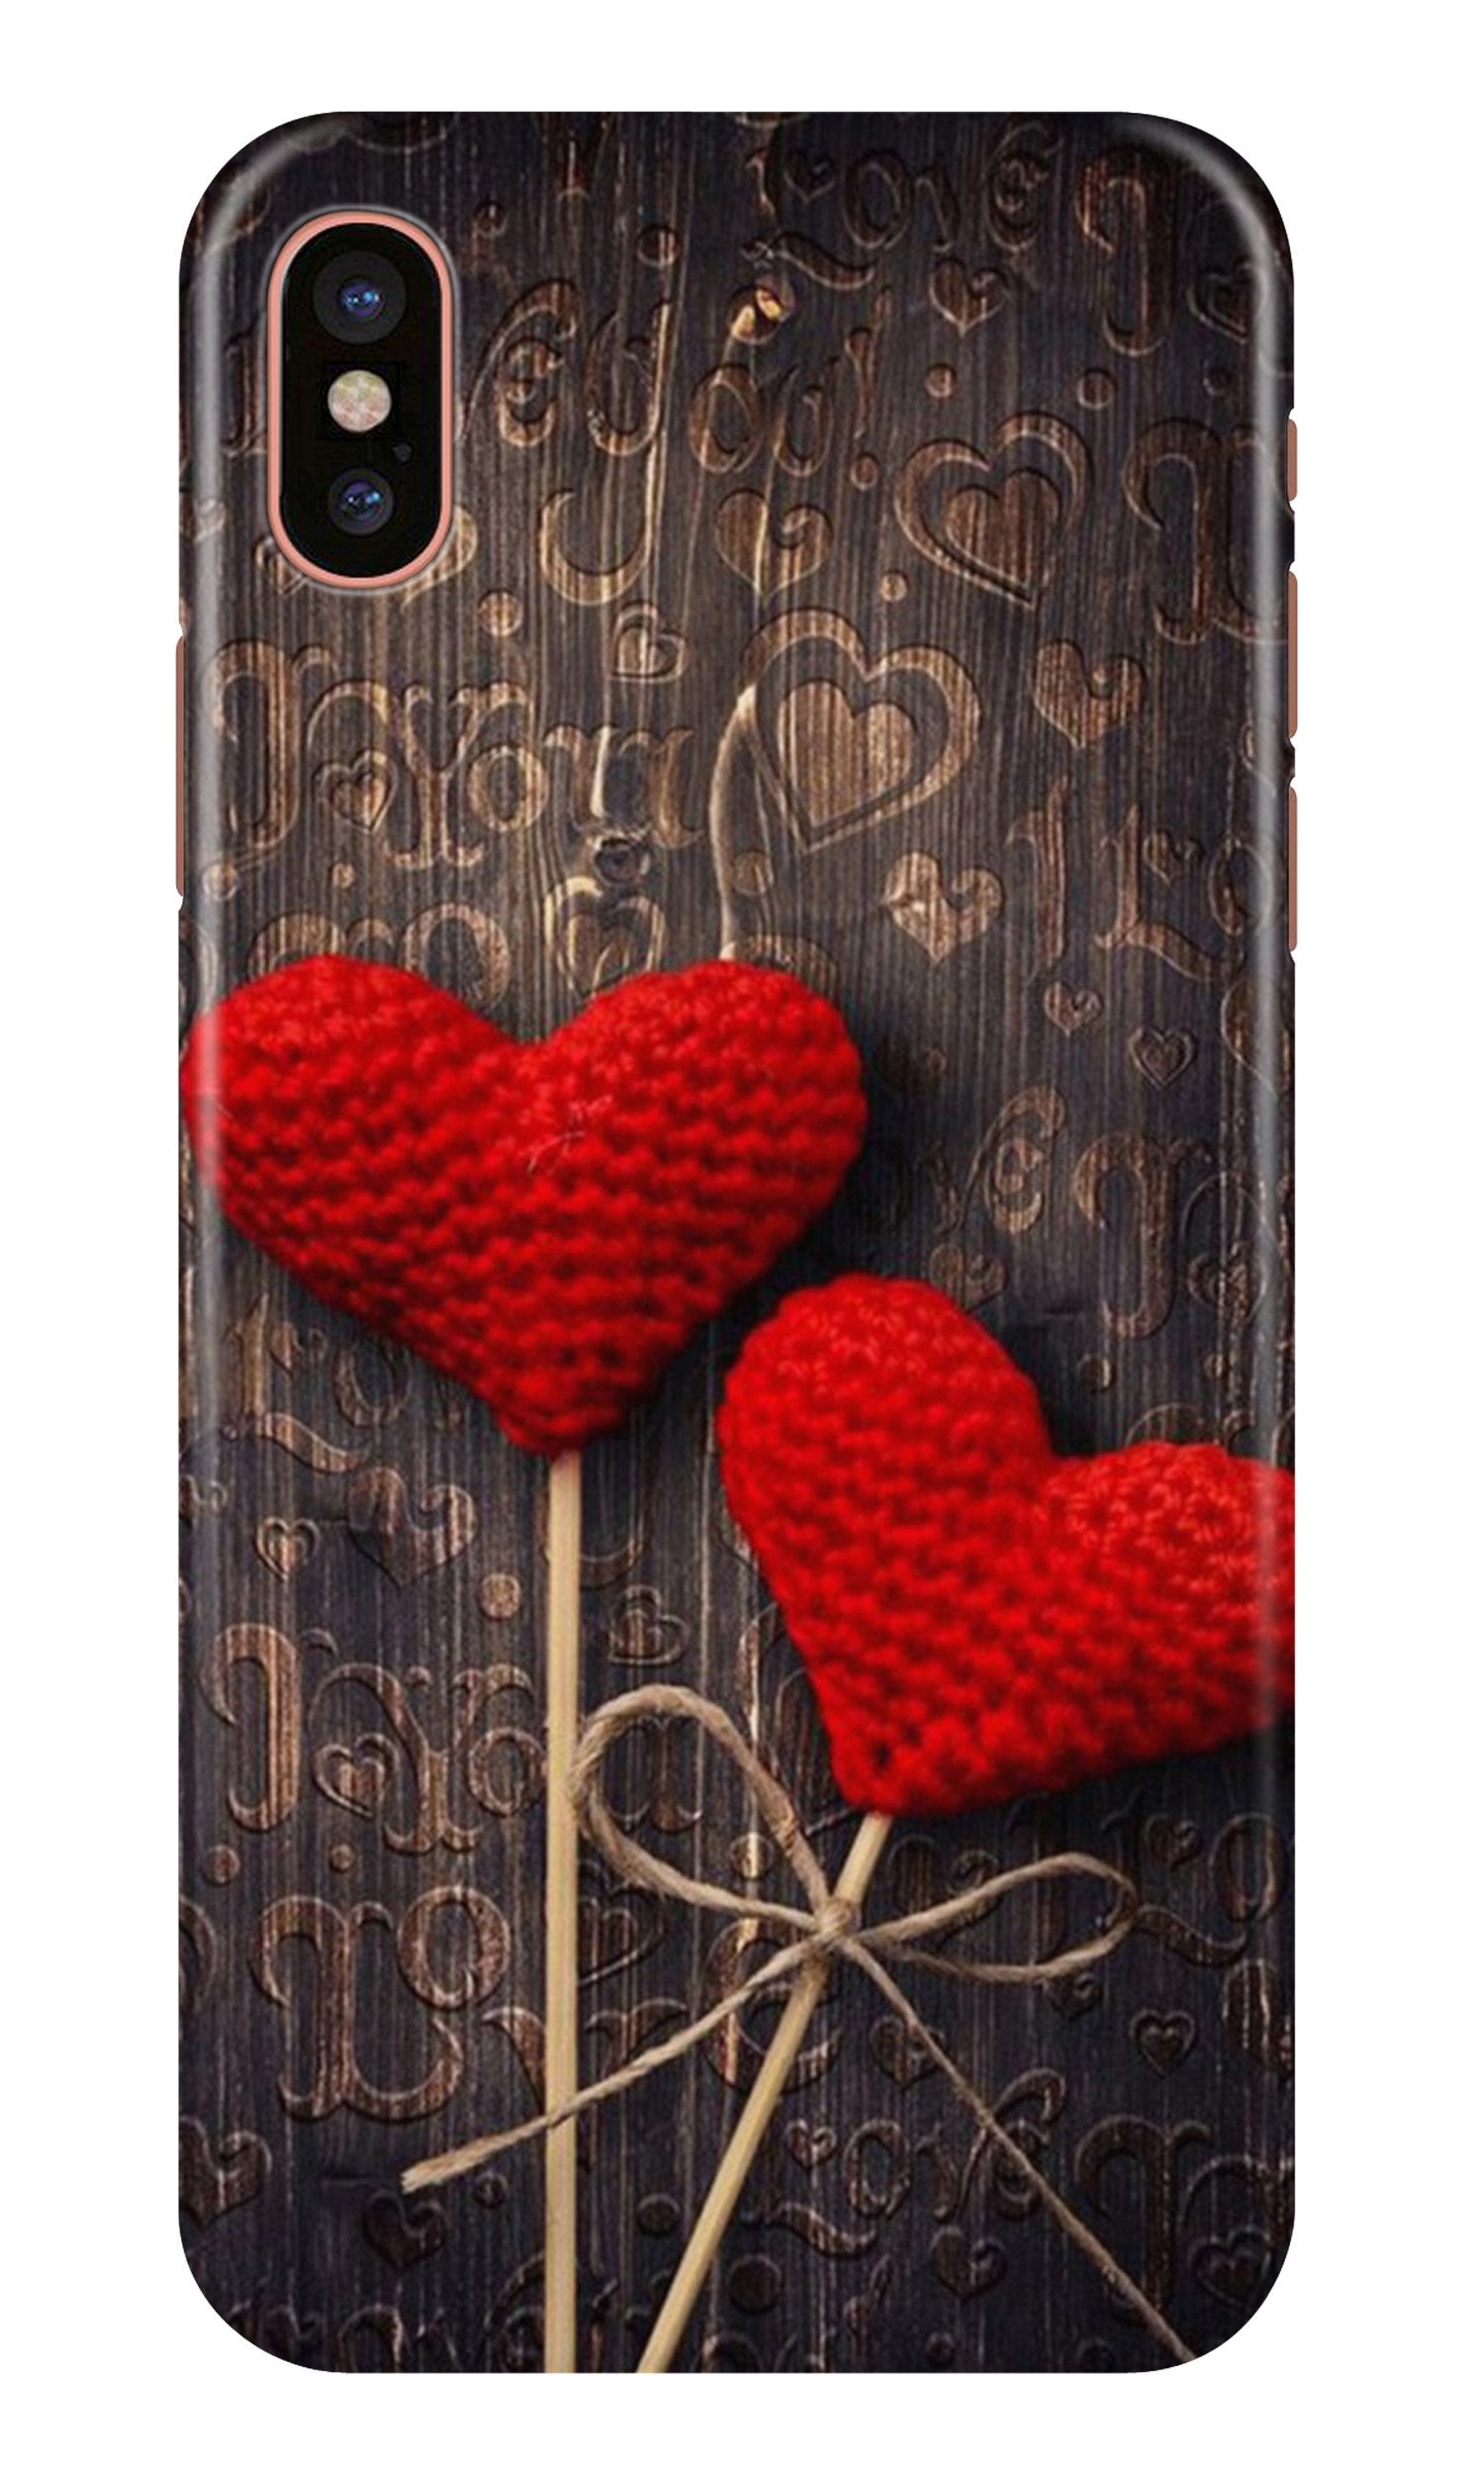 Red Hearts Case for iPhone X